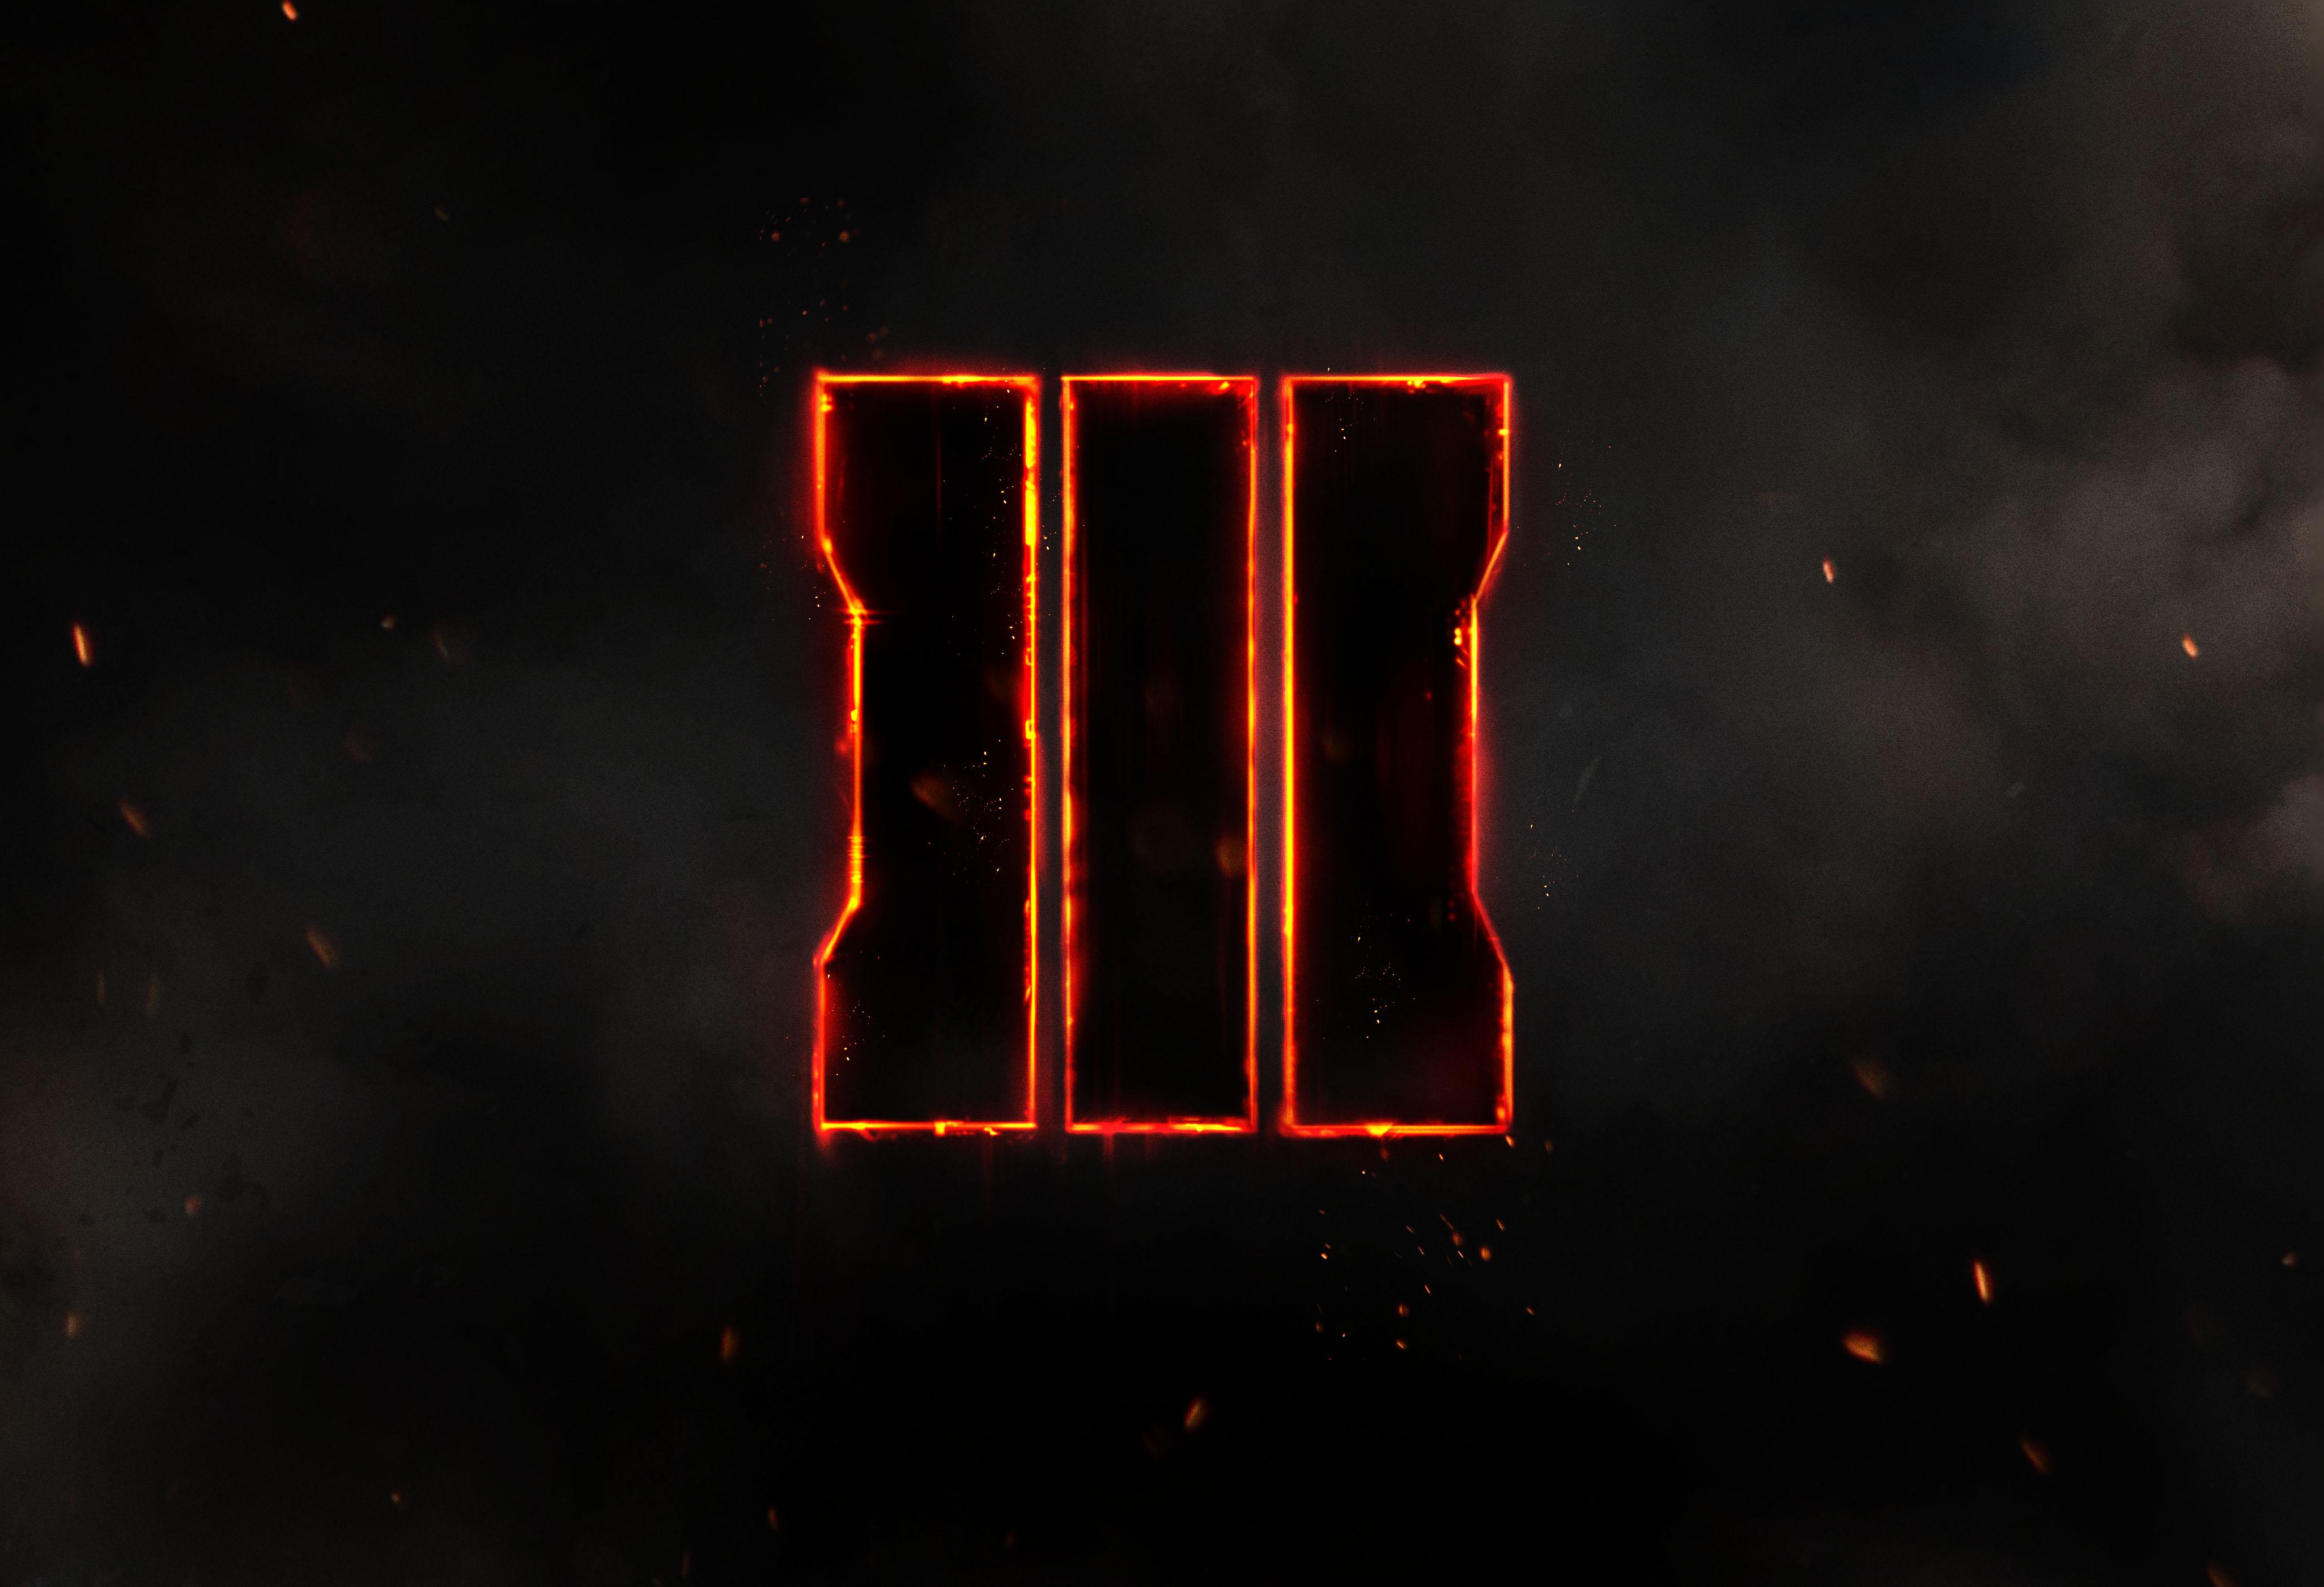 Call of Duty Black Ops III Officially Announced by Activision World 4101x2801